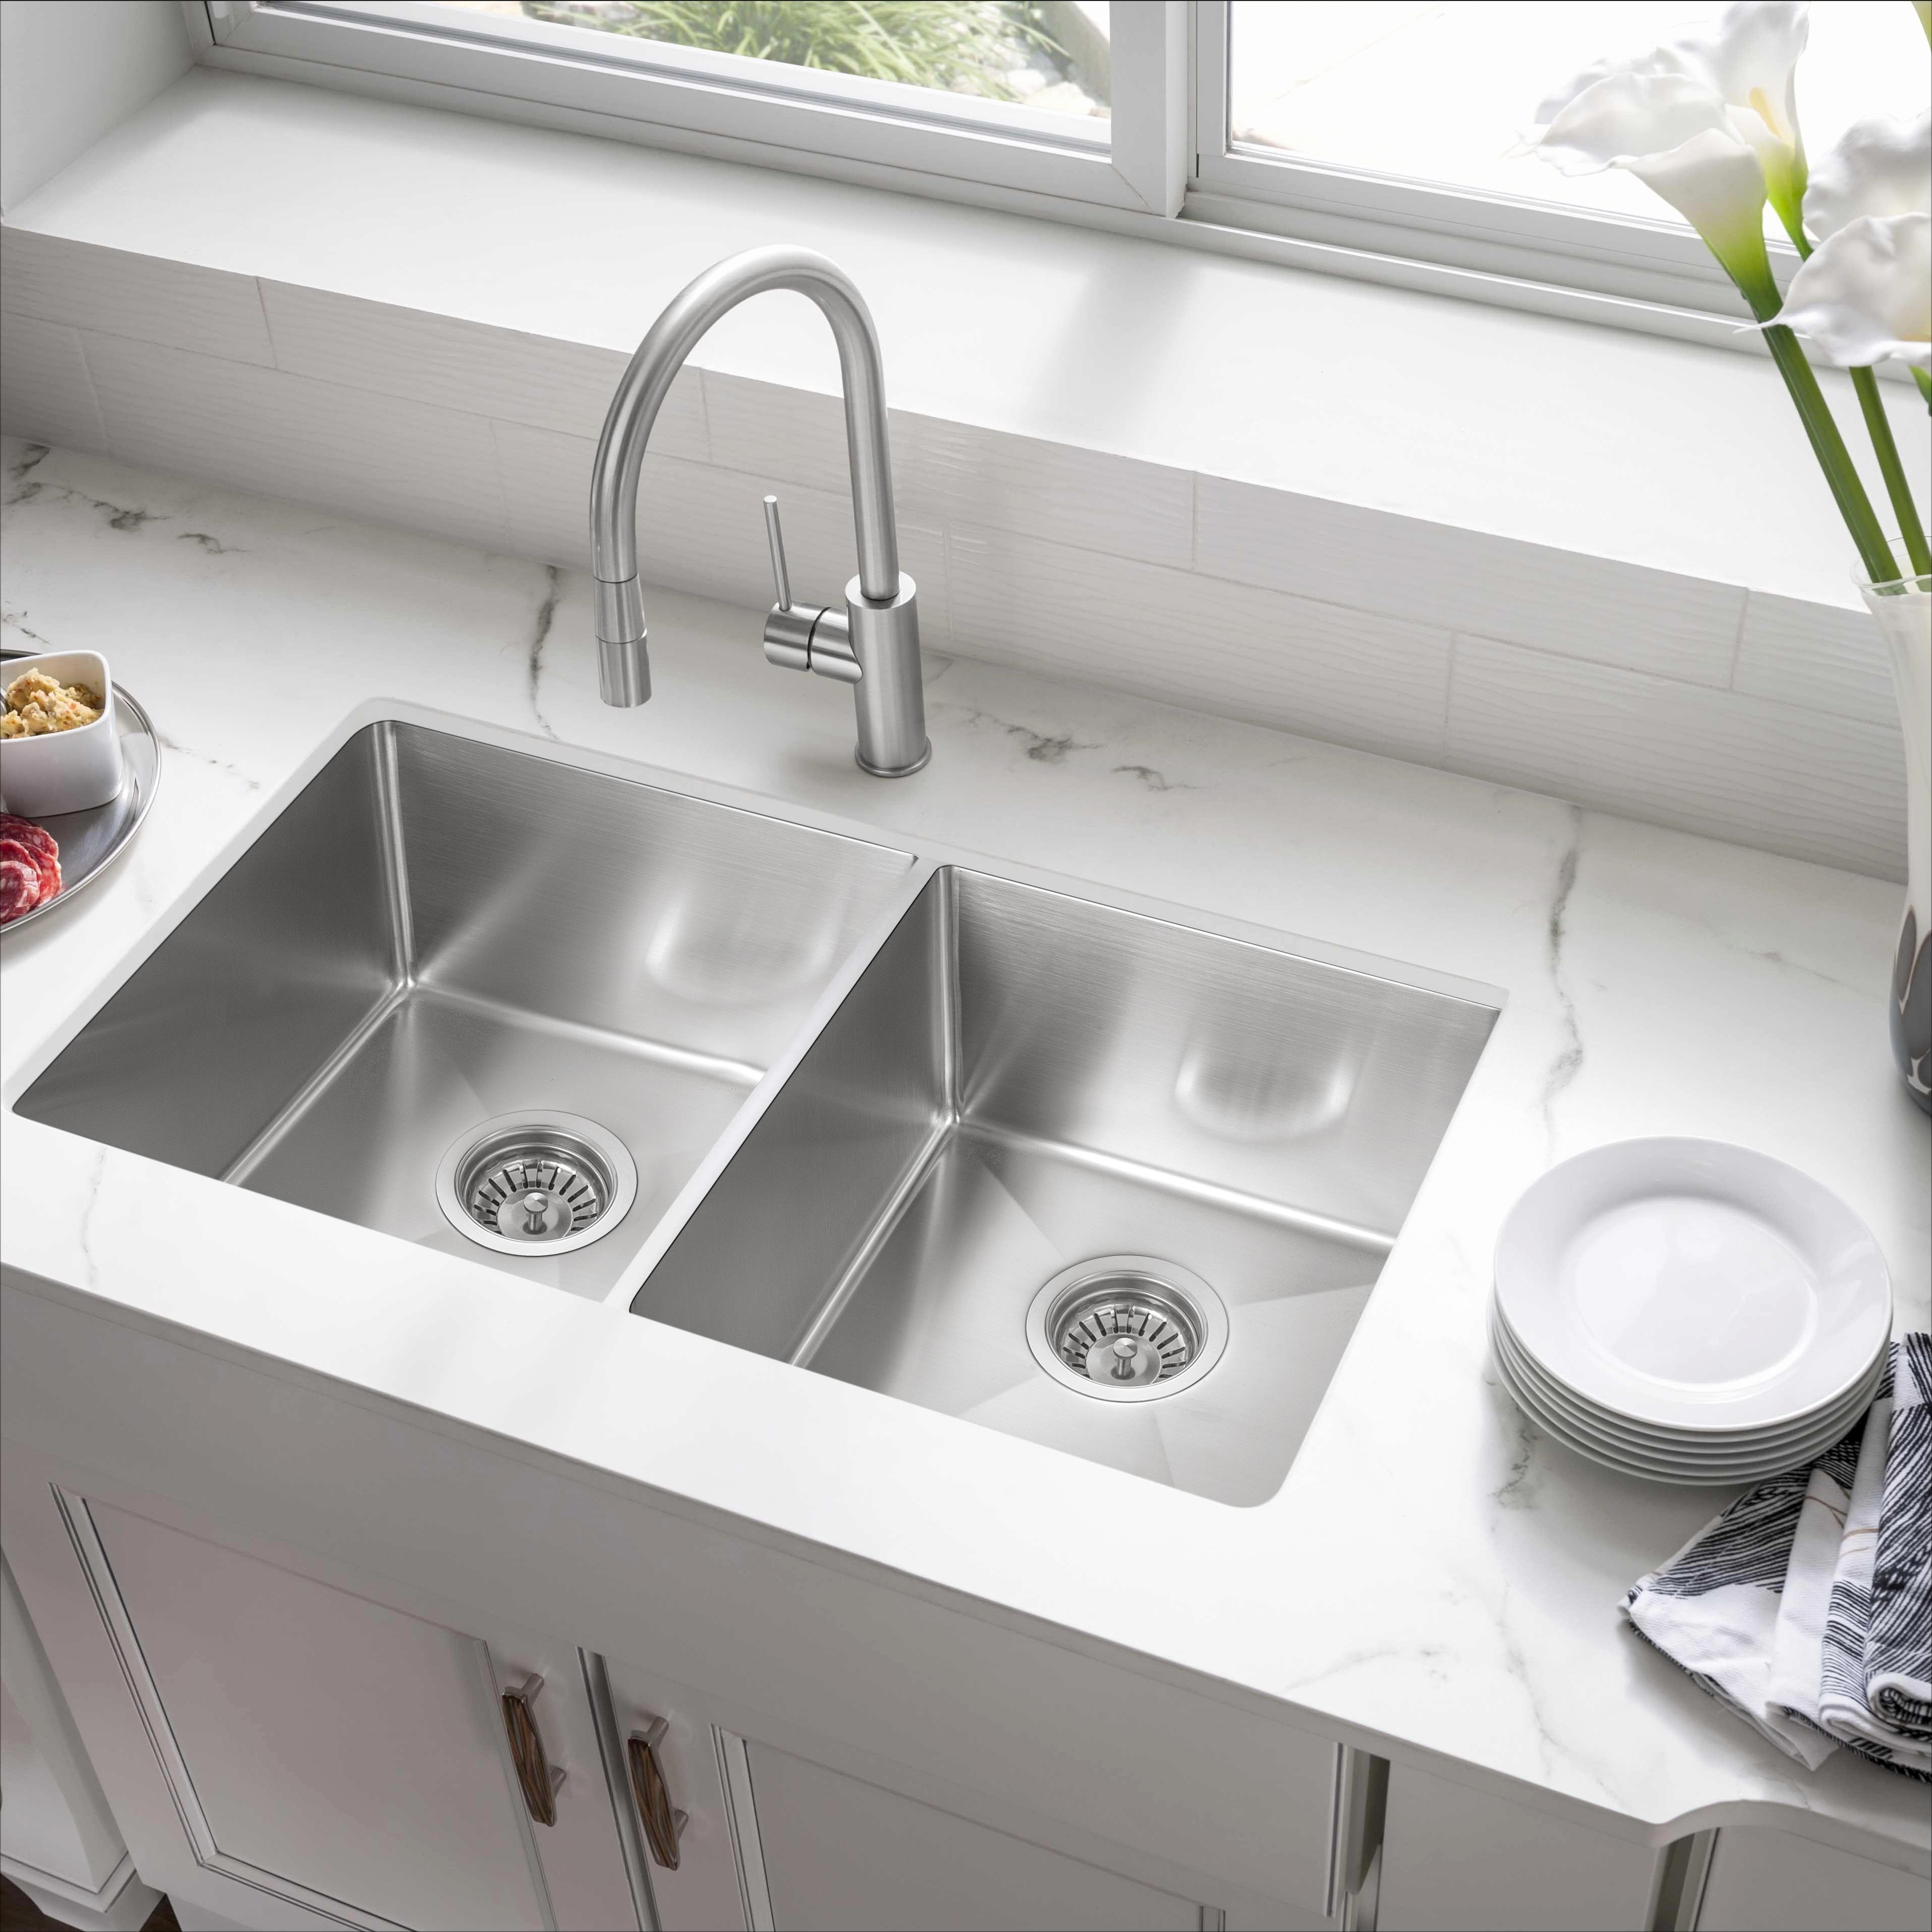 Handmade SUS304/316 Stainless Steel Double Bowl Kitchen Sink for Project and Home Use Featured Image